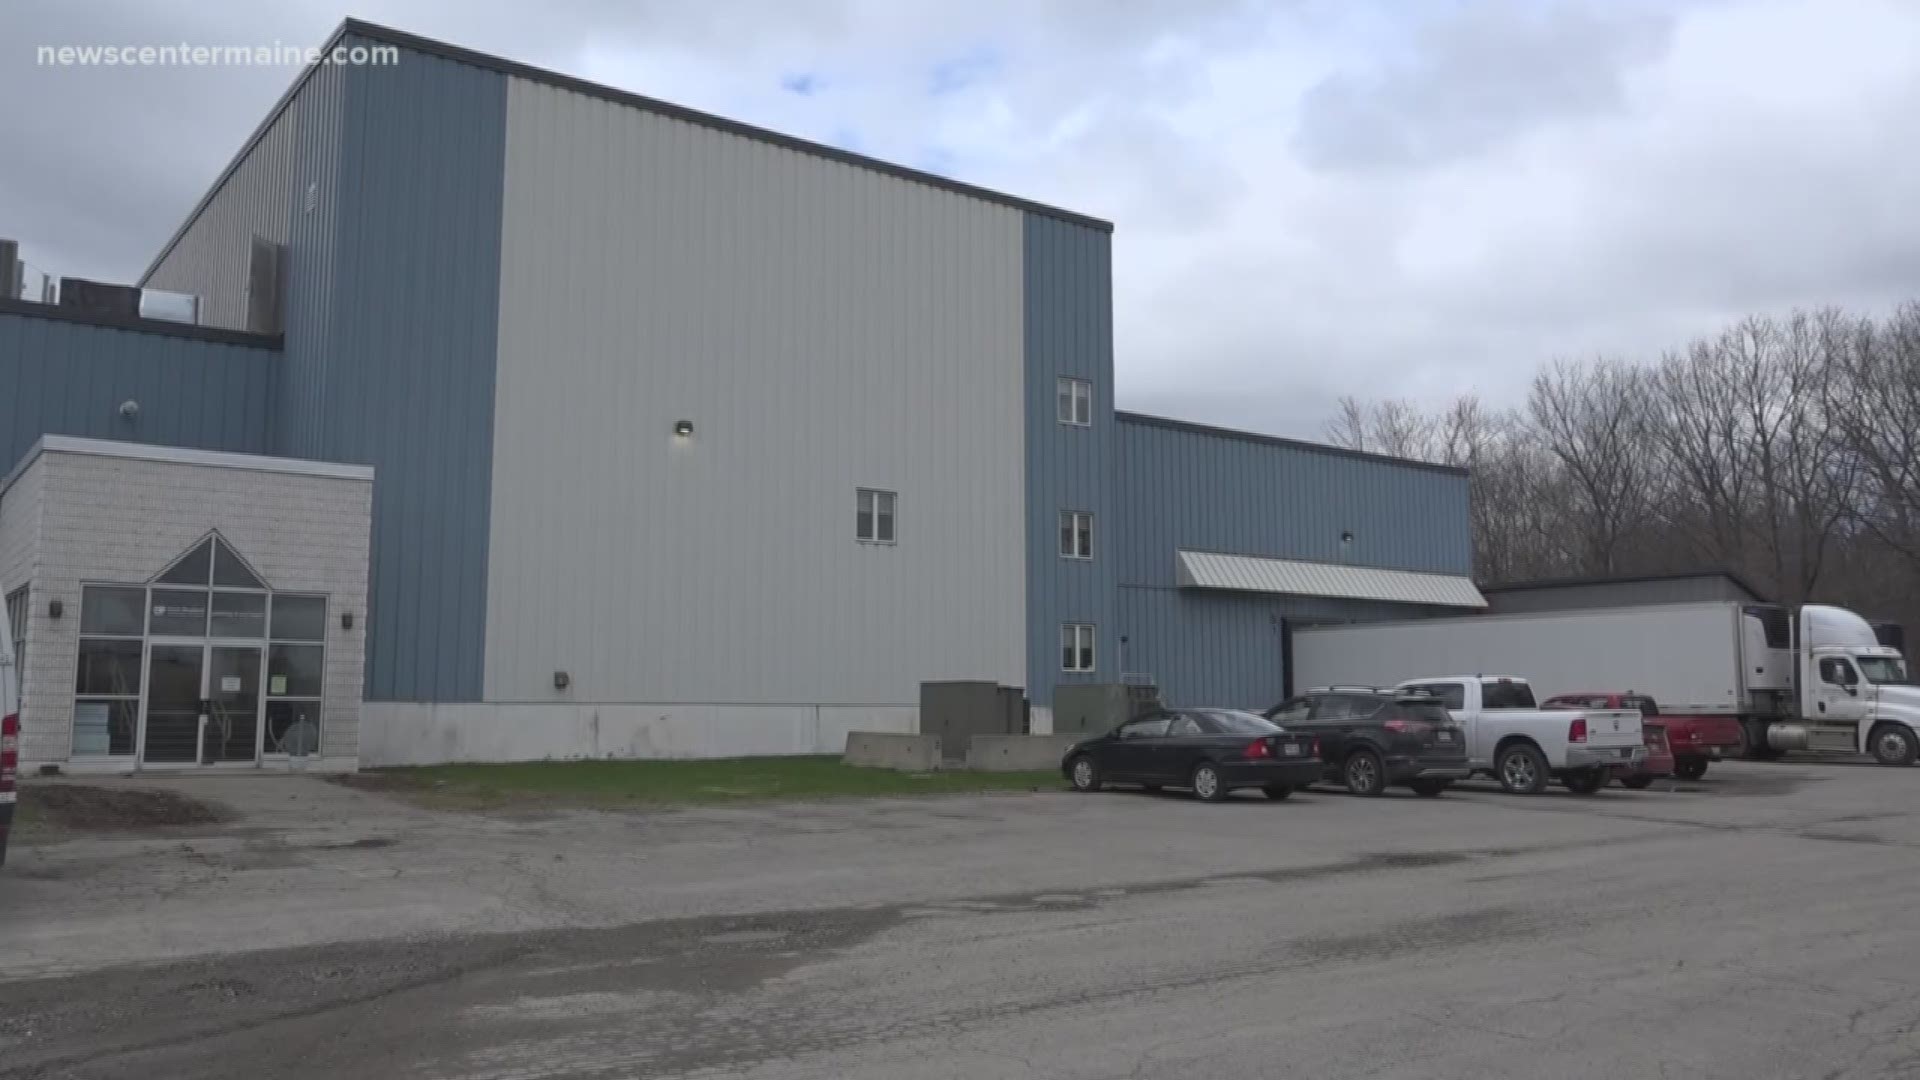 Good Shepherd Food Bank will soon open a new warehouse in Hampden. The new facility is much larger and about half renovated. They are in the middle of adding new freezer and cooling units.